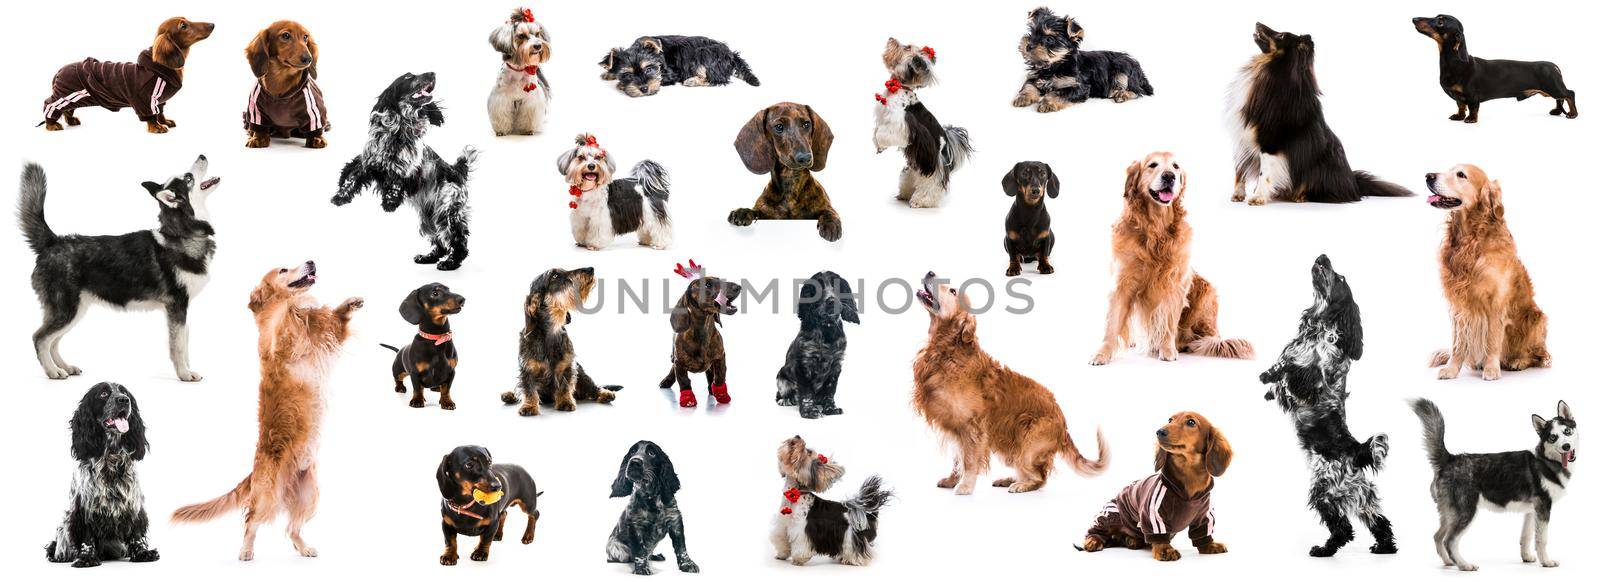 set photo of dogs of different breeds isolated on white background